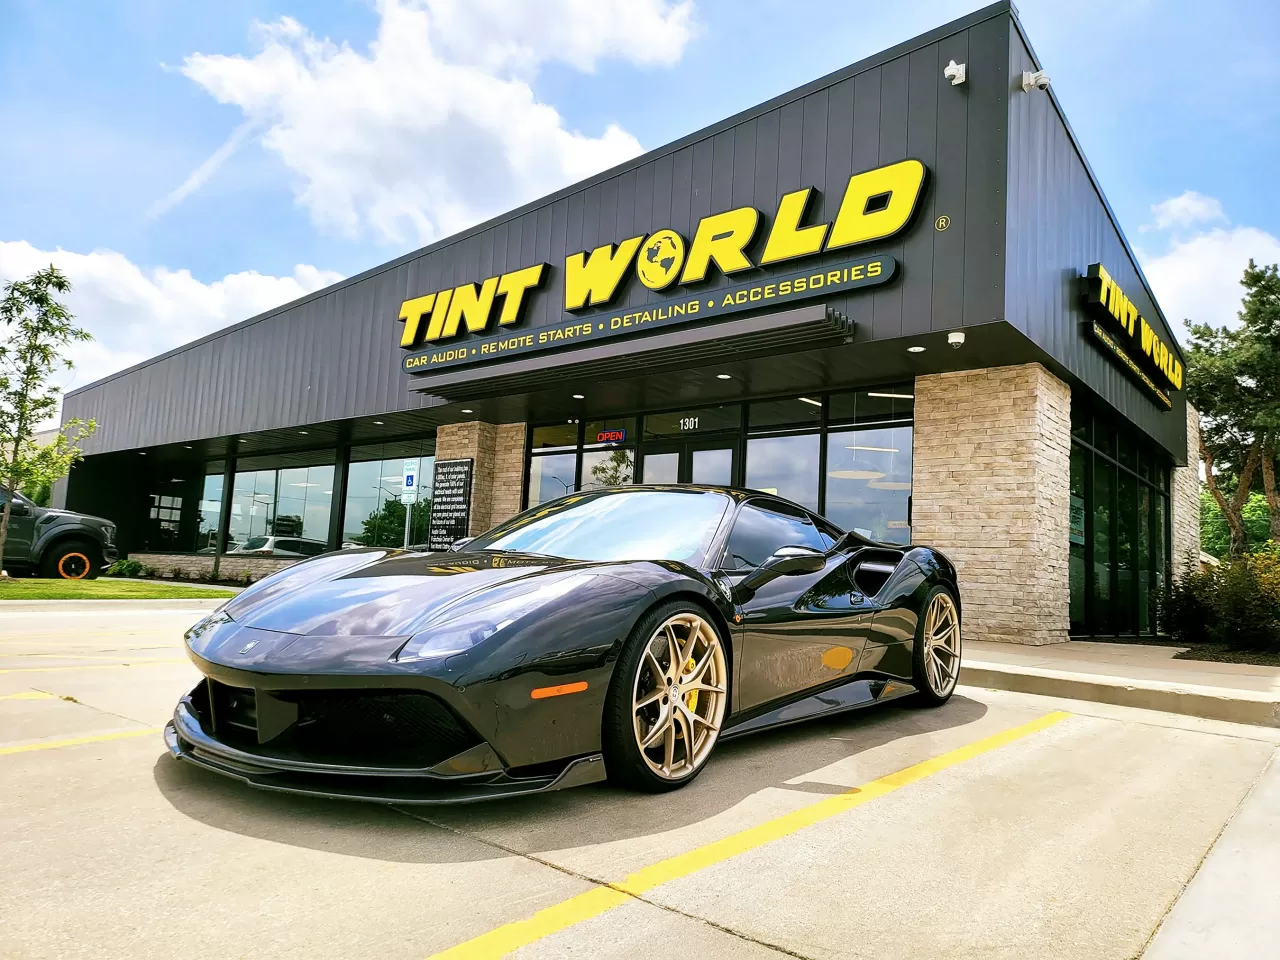 Tint World® Automotive Styling Centers™, a leading auto accessory and window tinting franchise, was honored for their outstanding franchisee satisfaction by being named to Franchise Business Review’s 18th annual list of the best franchise opportunities according to owner feedback. img#1